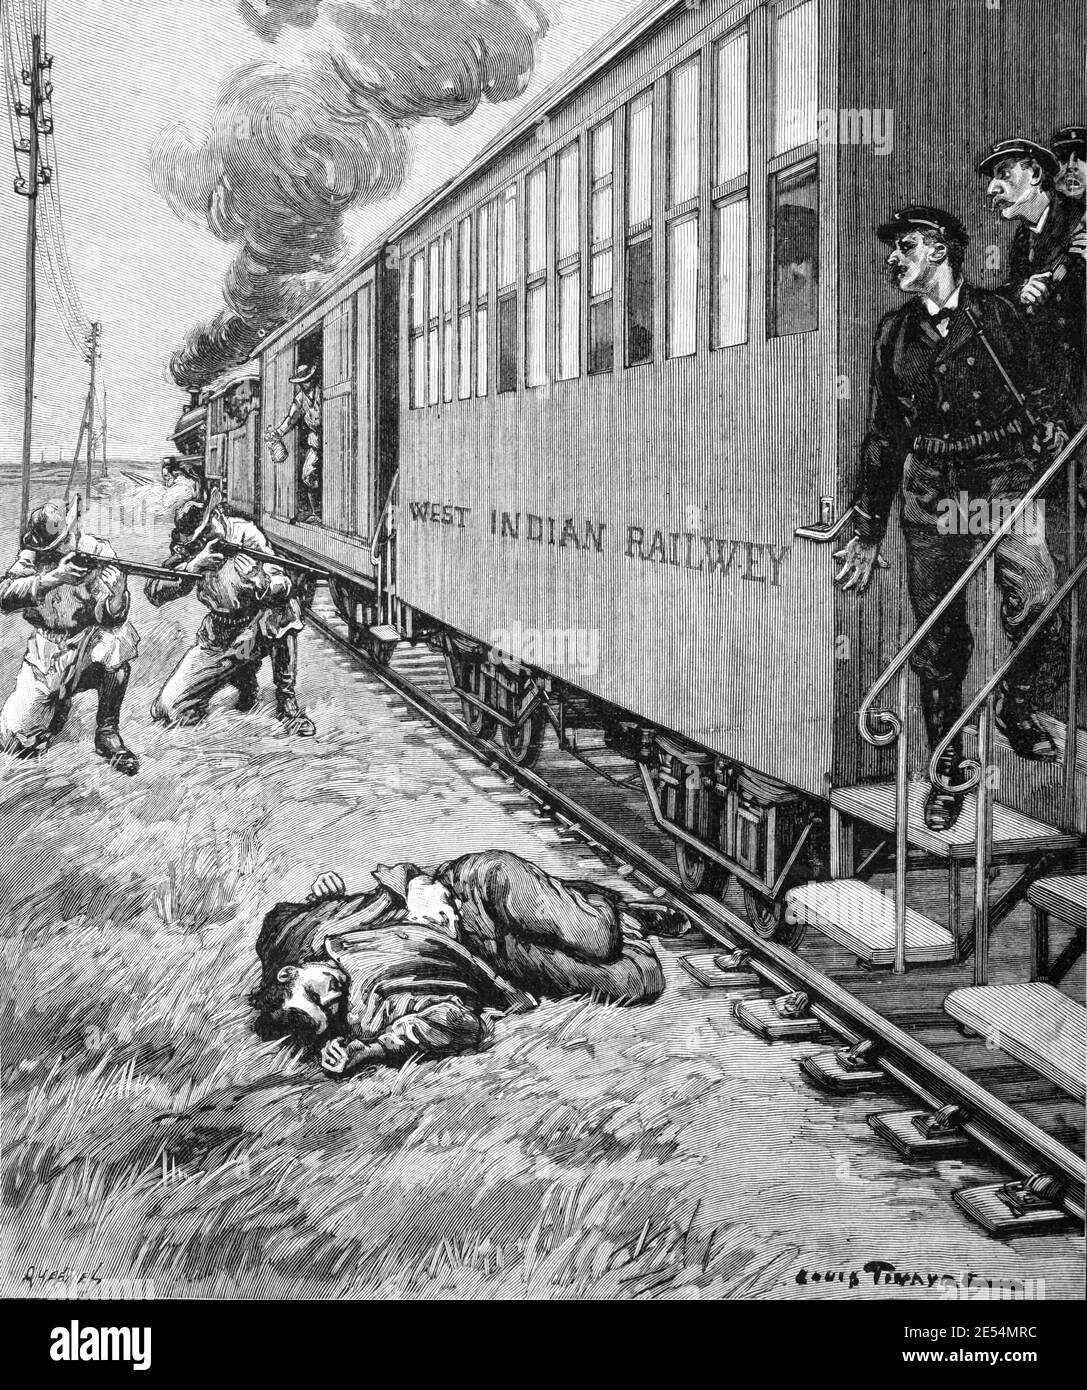 Train Robbers West Indian Railway Wild West USA or United States of America 1902 Vintage Illustration or Engraving Stock Photo